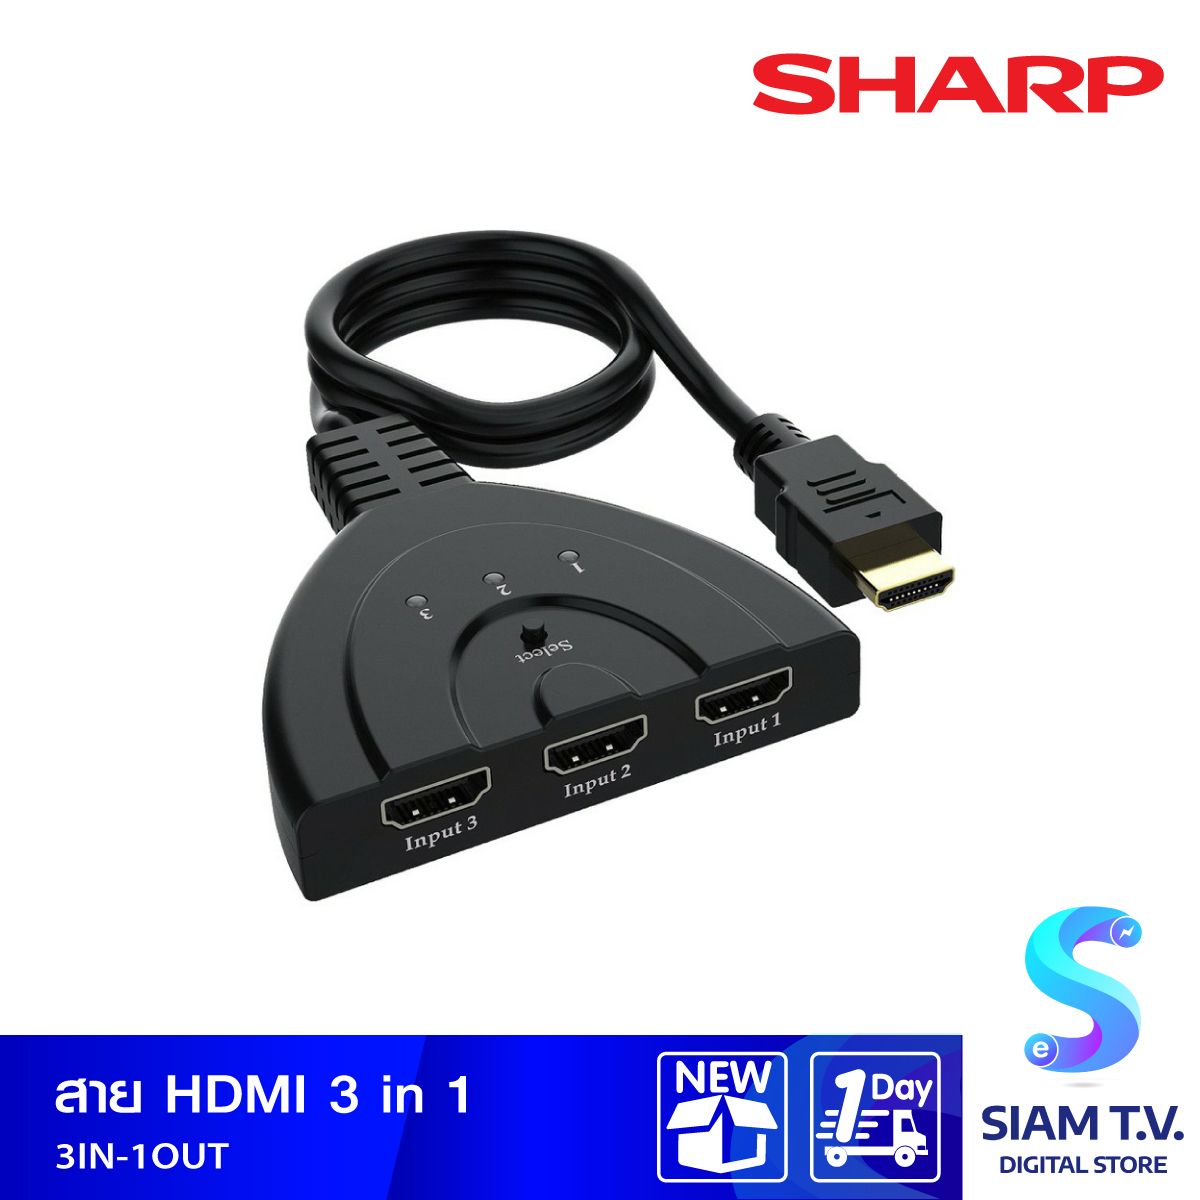 SHARP HDMI Splitter Switch รุ่น 3IN-1OUT